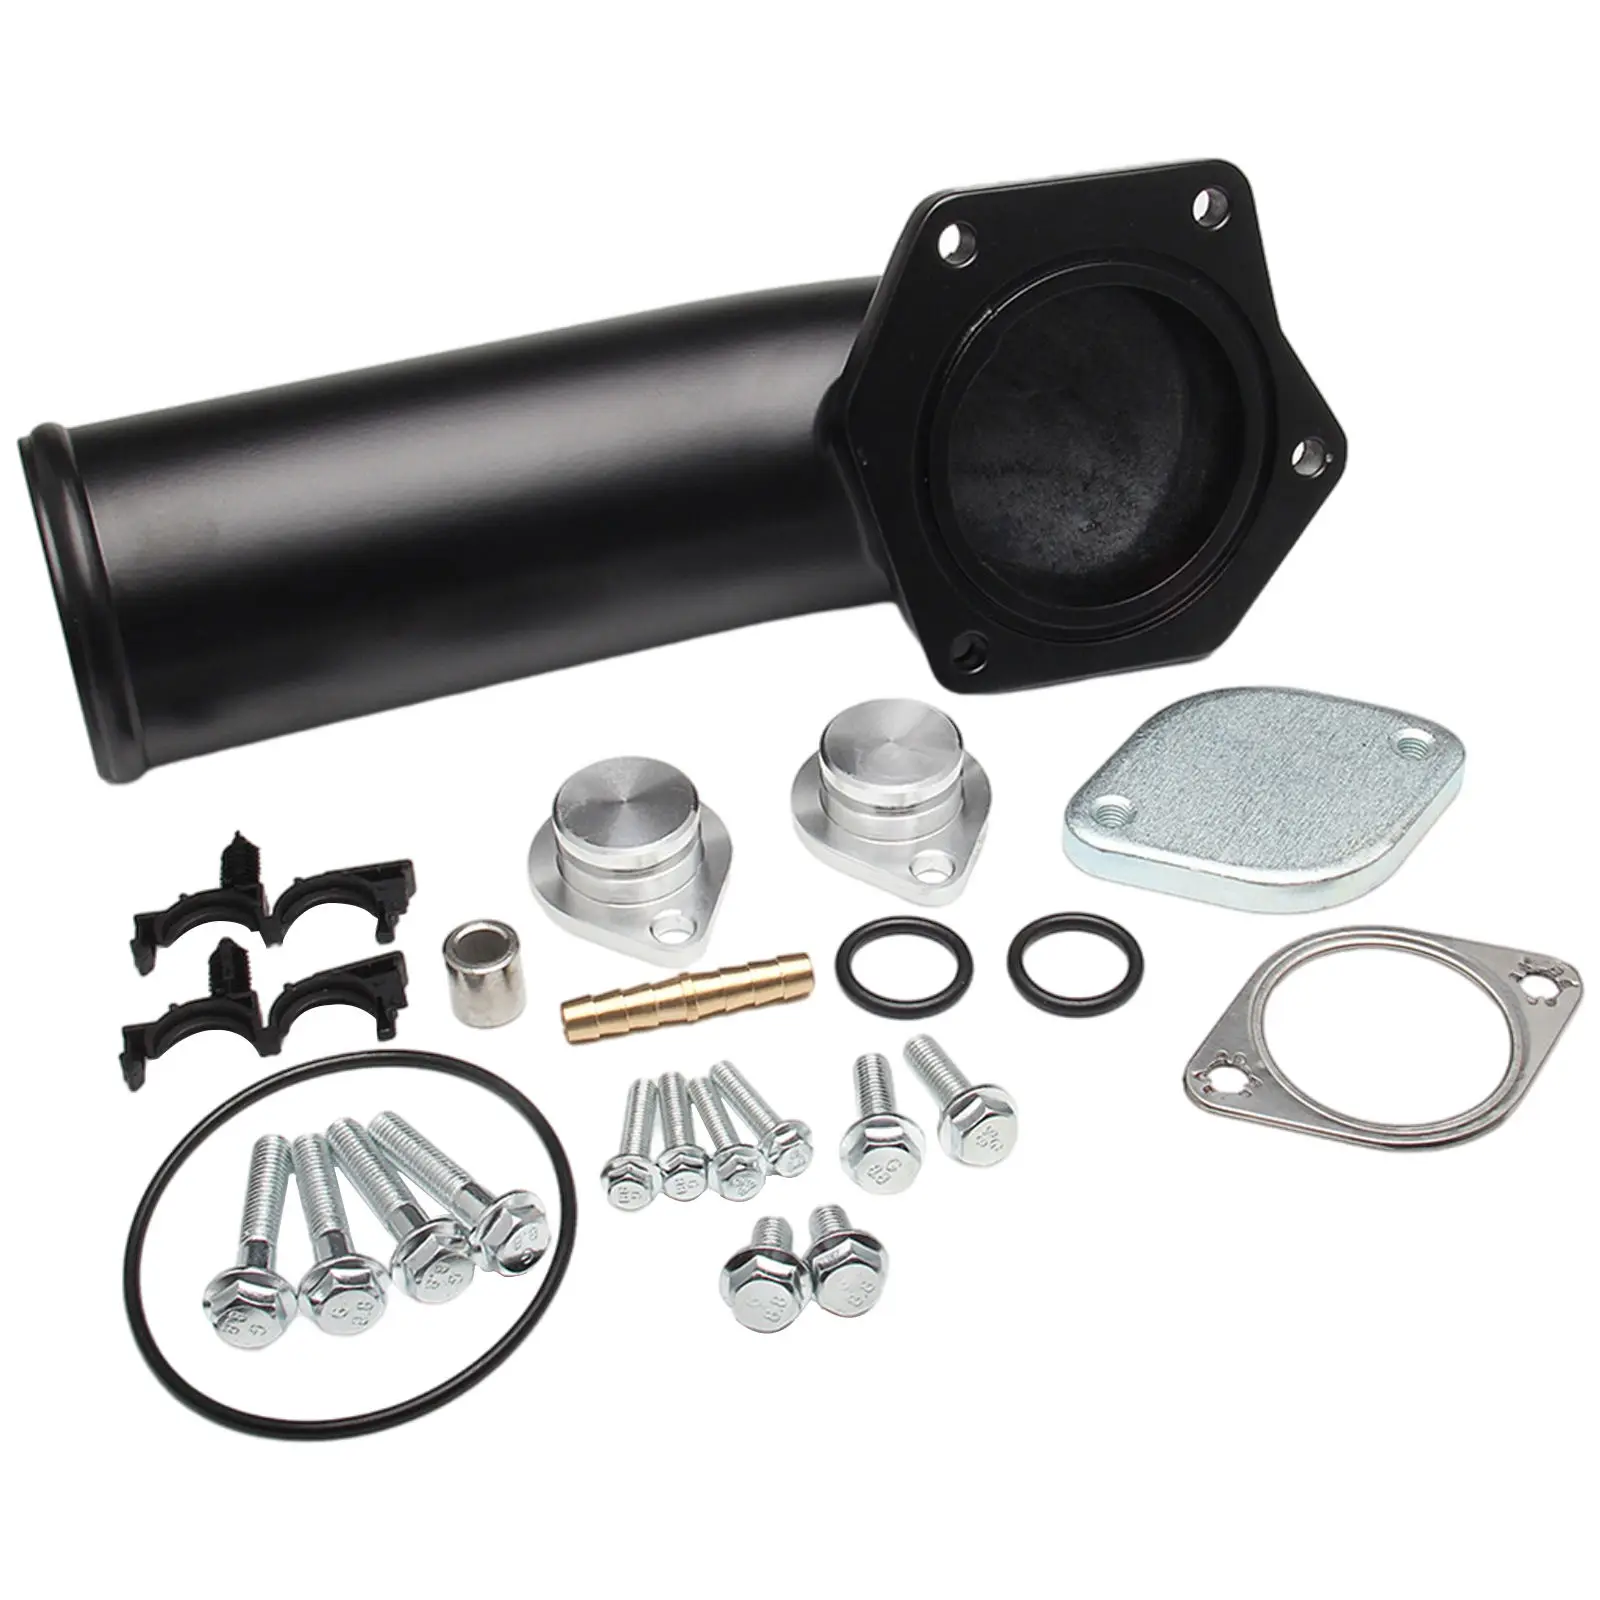 Intake Elbow Pipe Repalcement 6.4L High Flow Black Powerstroke 391Ci Parts 2008-2010 Valve Kit for Ford Super Duty